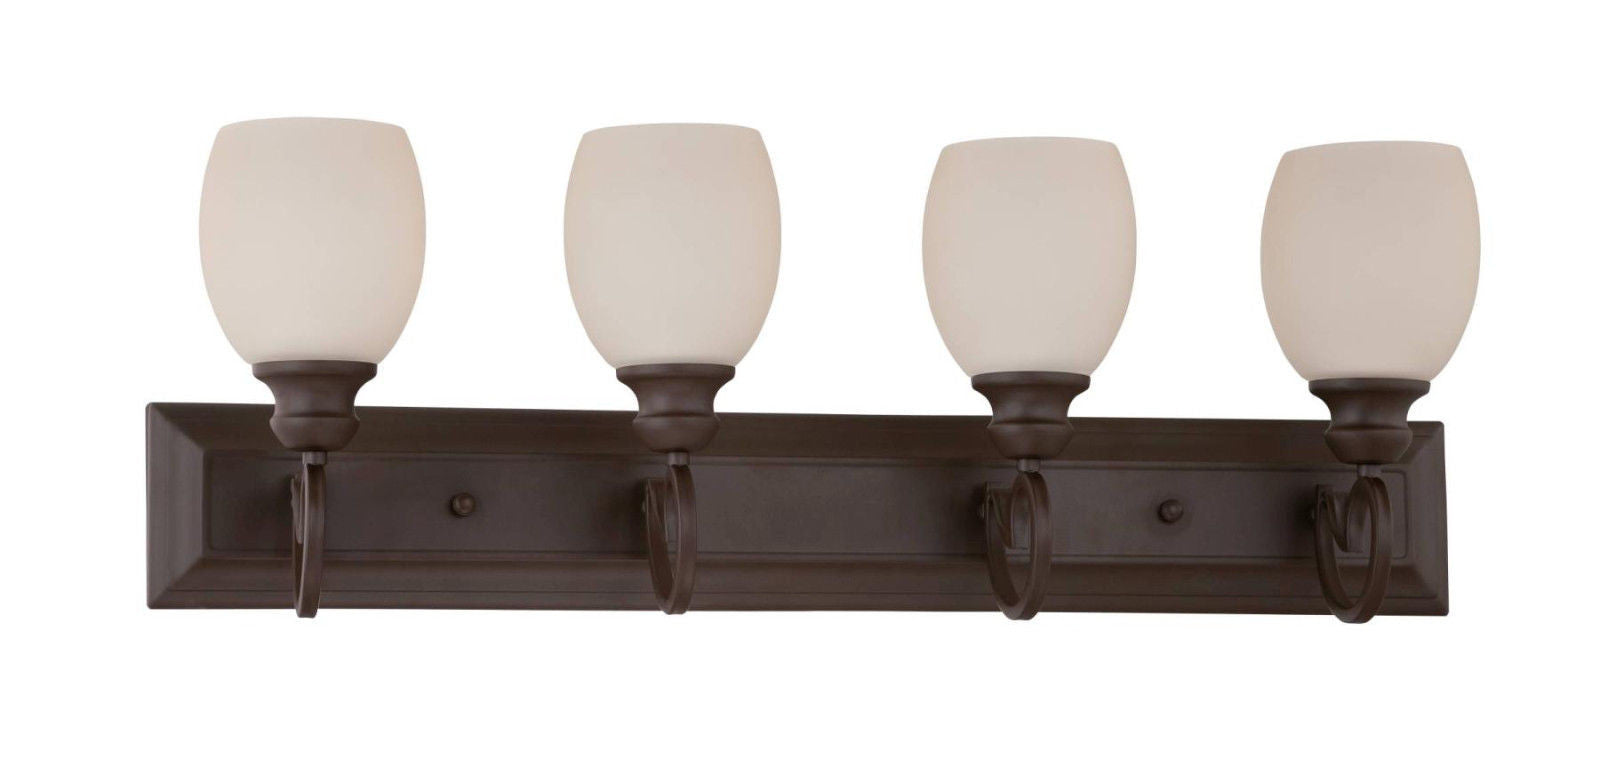 Sunset Lighting F13074-47 Abney Collection Four Light Bath Vanity Wall Fixture in Rustico Bronze Finish